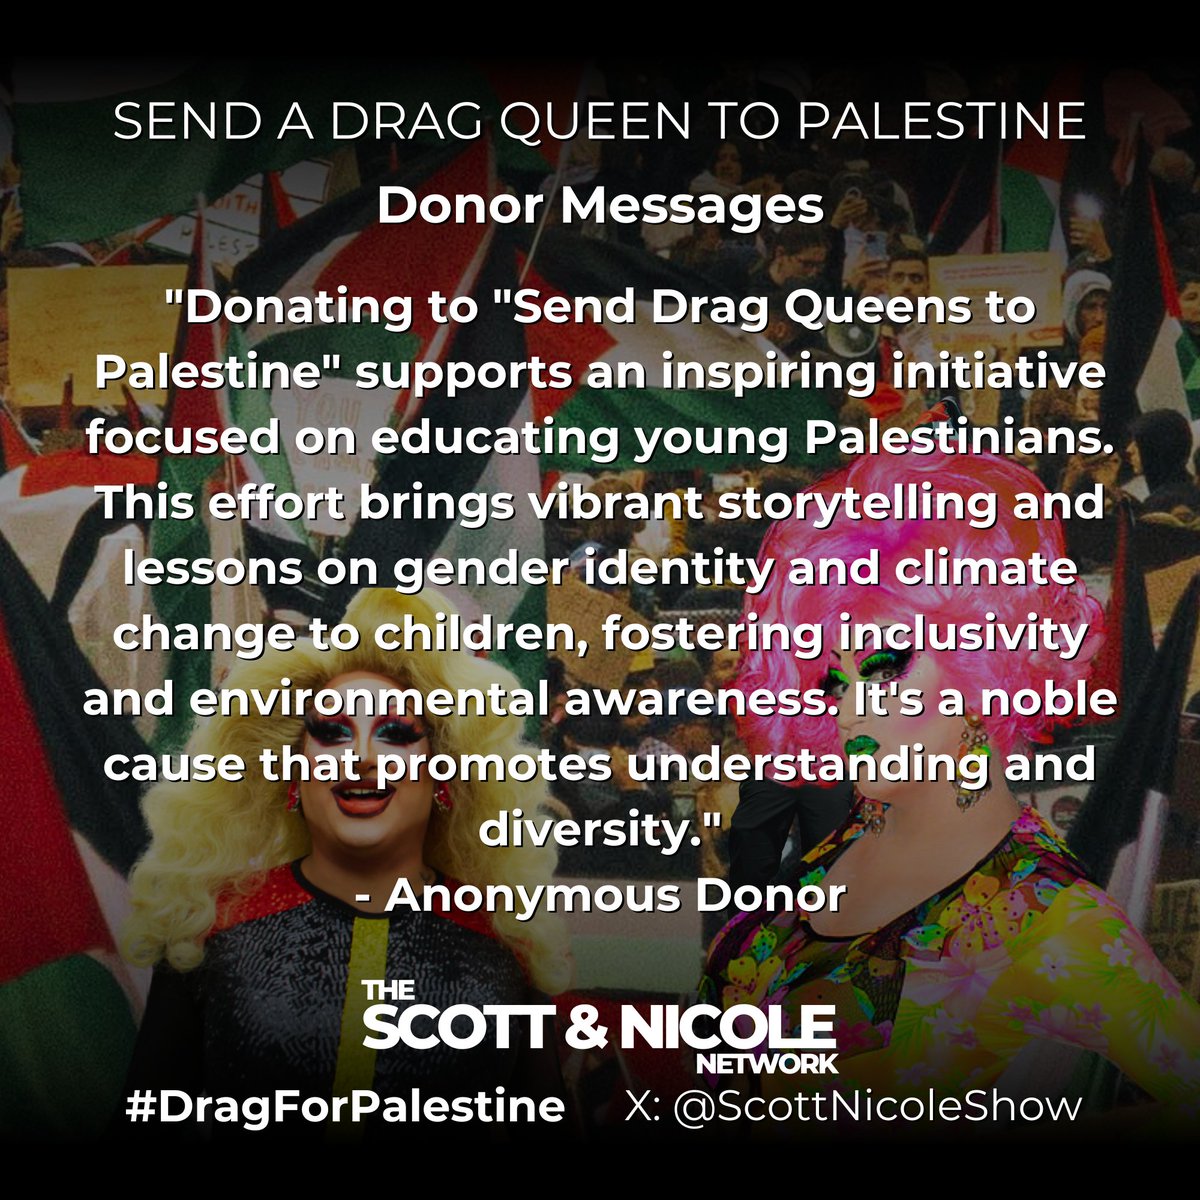 DRAG QUEEN SUPPORT: as we continue to receive inspiring messages from our supporters we'll post them:ucla 'Donating to 'Send Drag Queens to Palestine' supports an inspiring initiative focused on educating young Palestinians. This effort brings vibrant storytelling and lessons on…